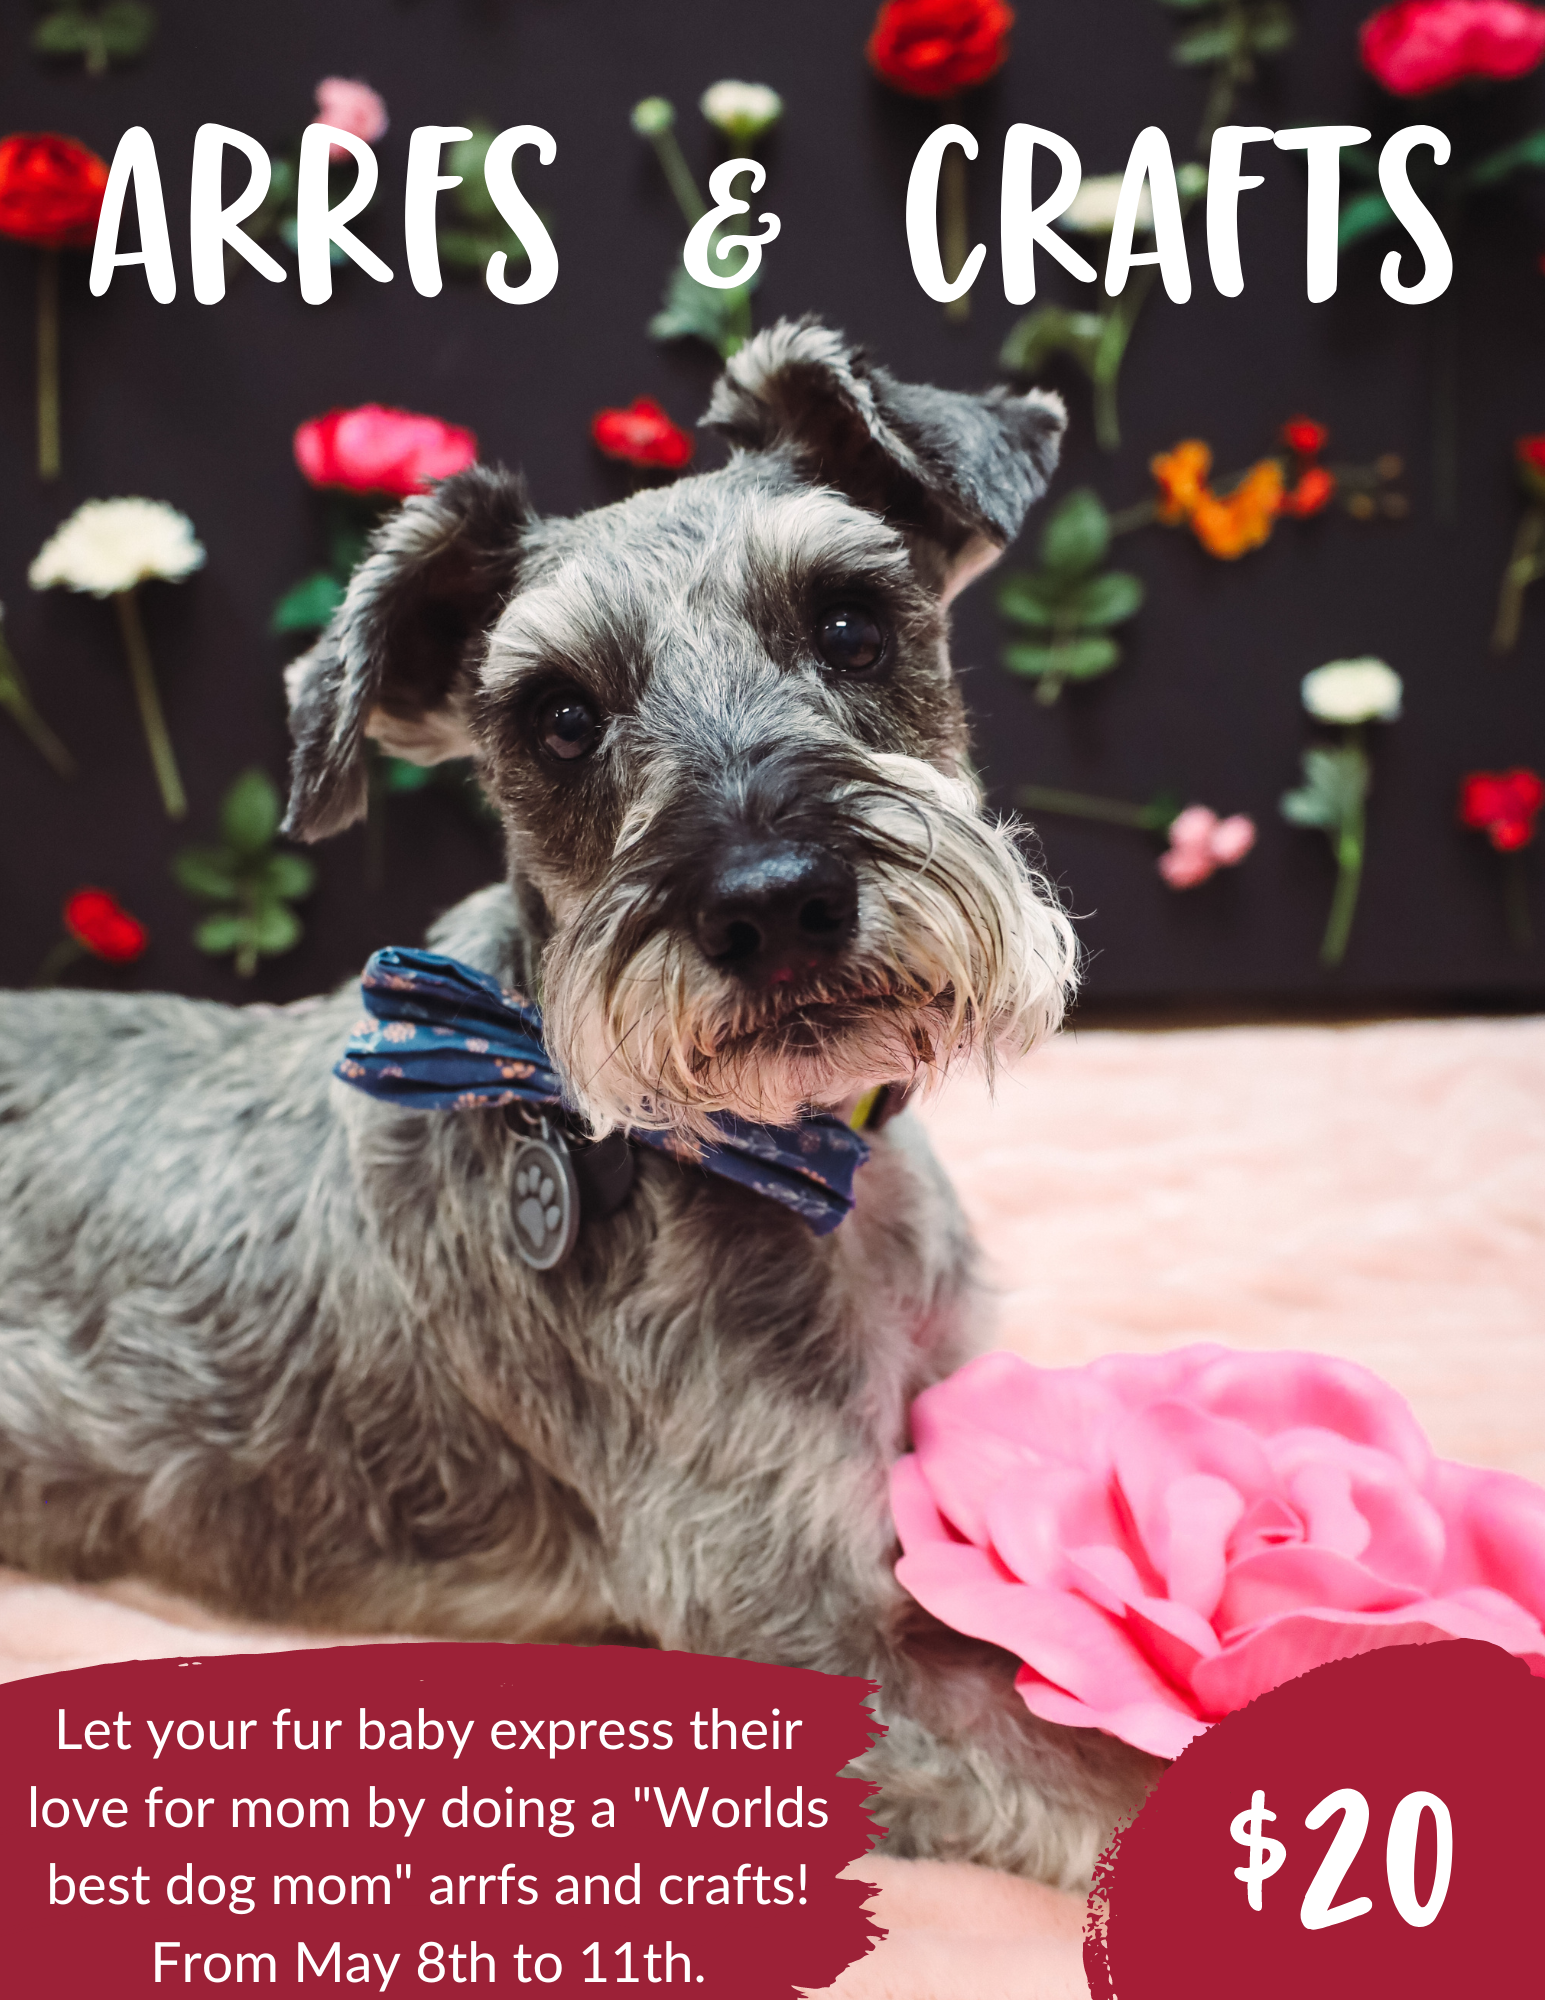 Arrs & Crafts May 8-11. $20